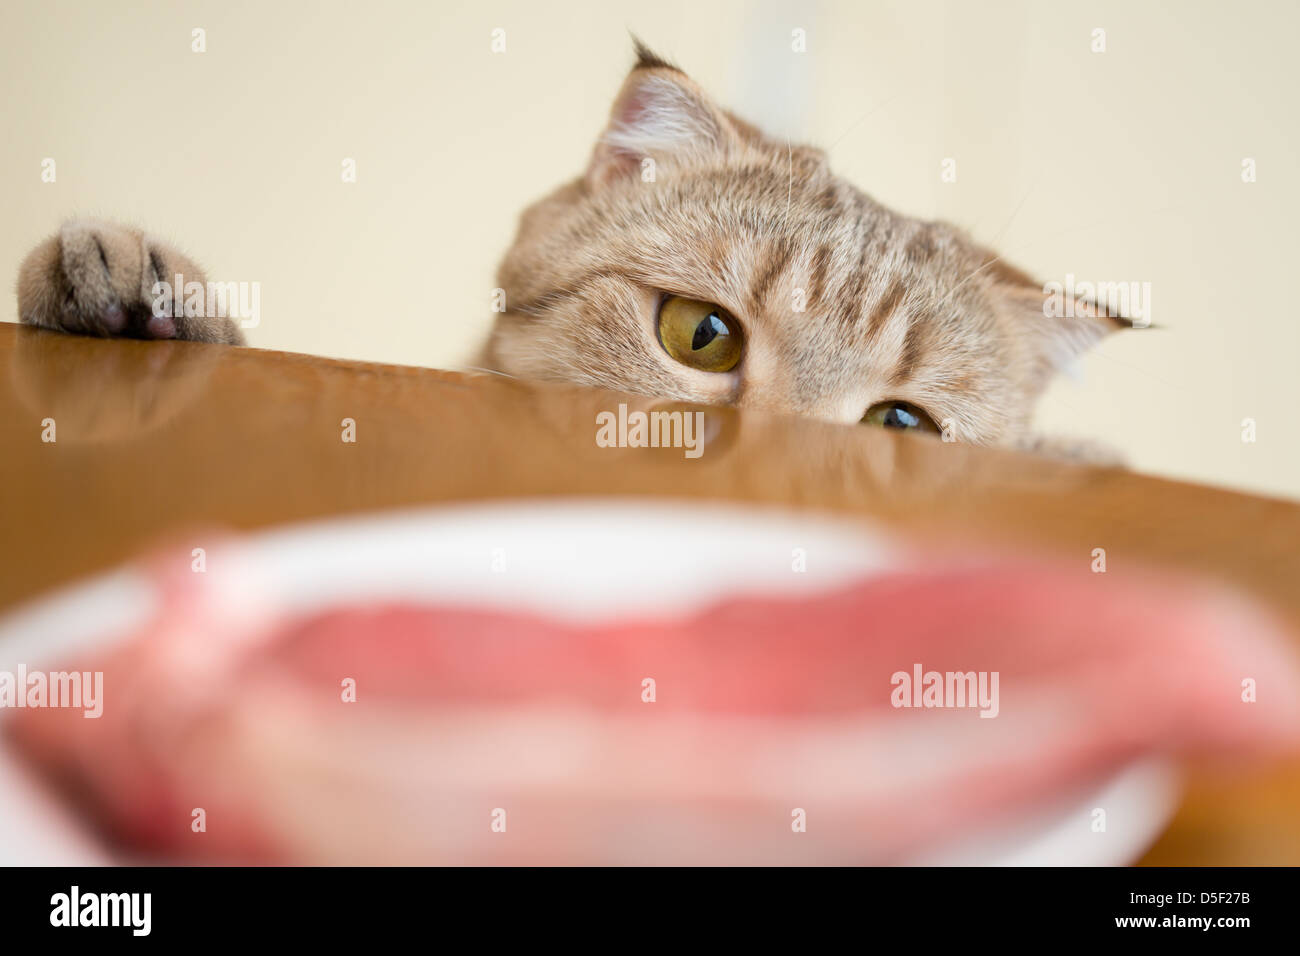 Cat trying to steal food from kitchen table Stock Photo